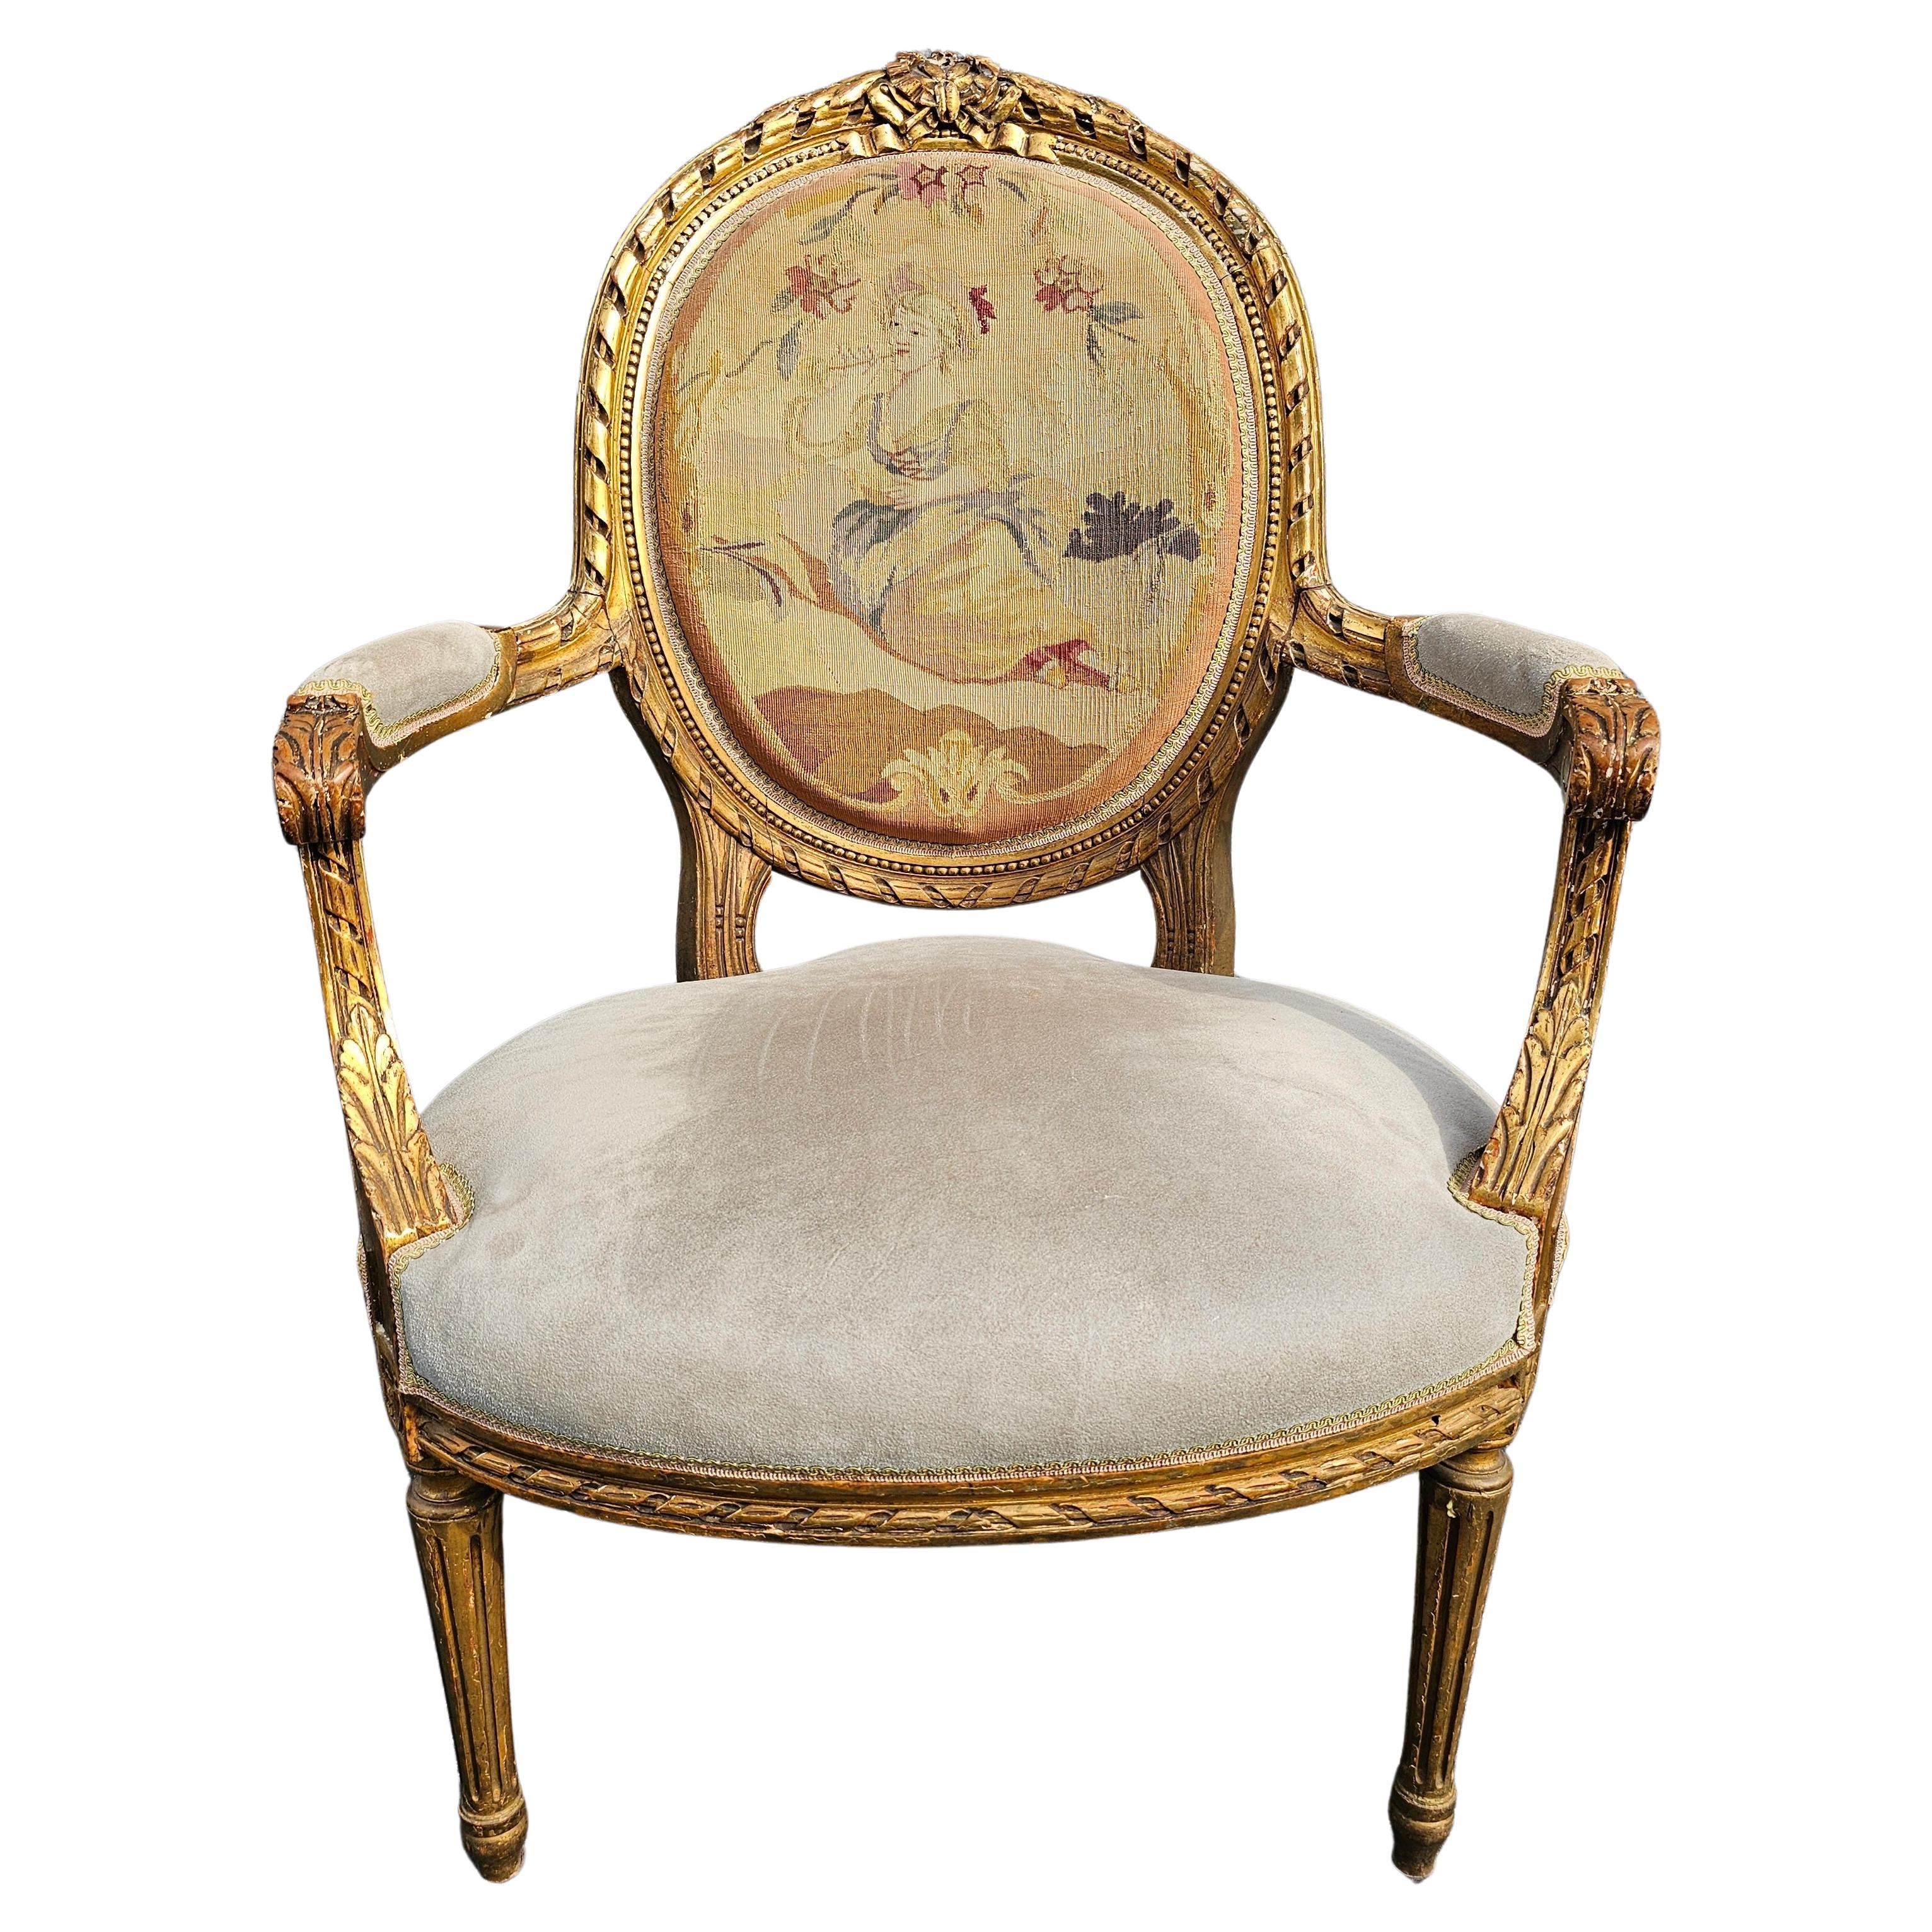 An exquisite giltwood, fine Suede Leather and French needlepoint upholstered bergere chair in very good vintage condition.
Measures 26